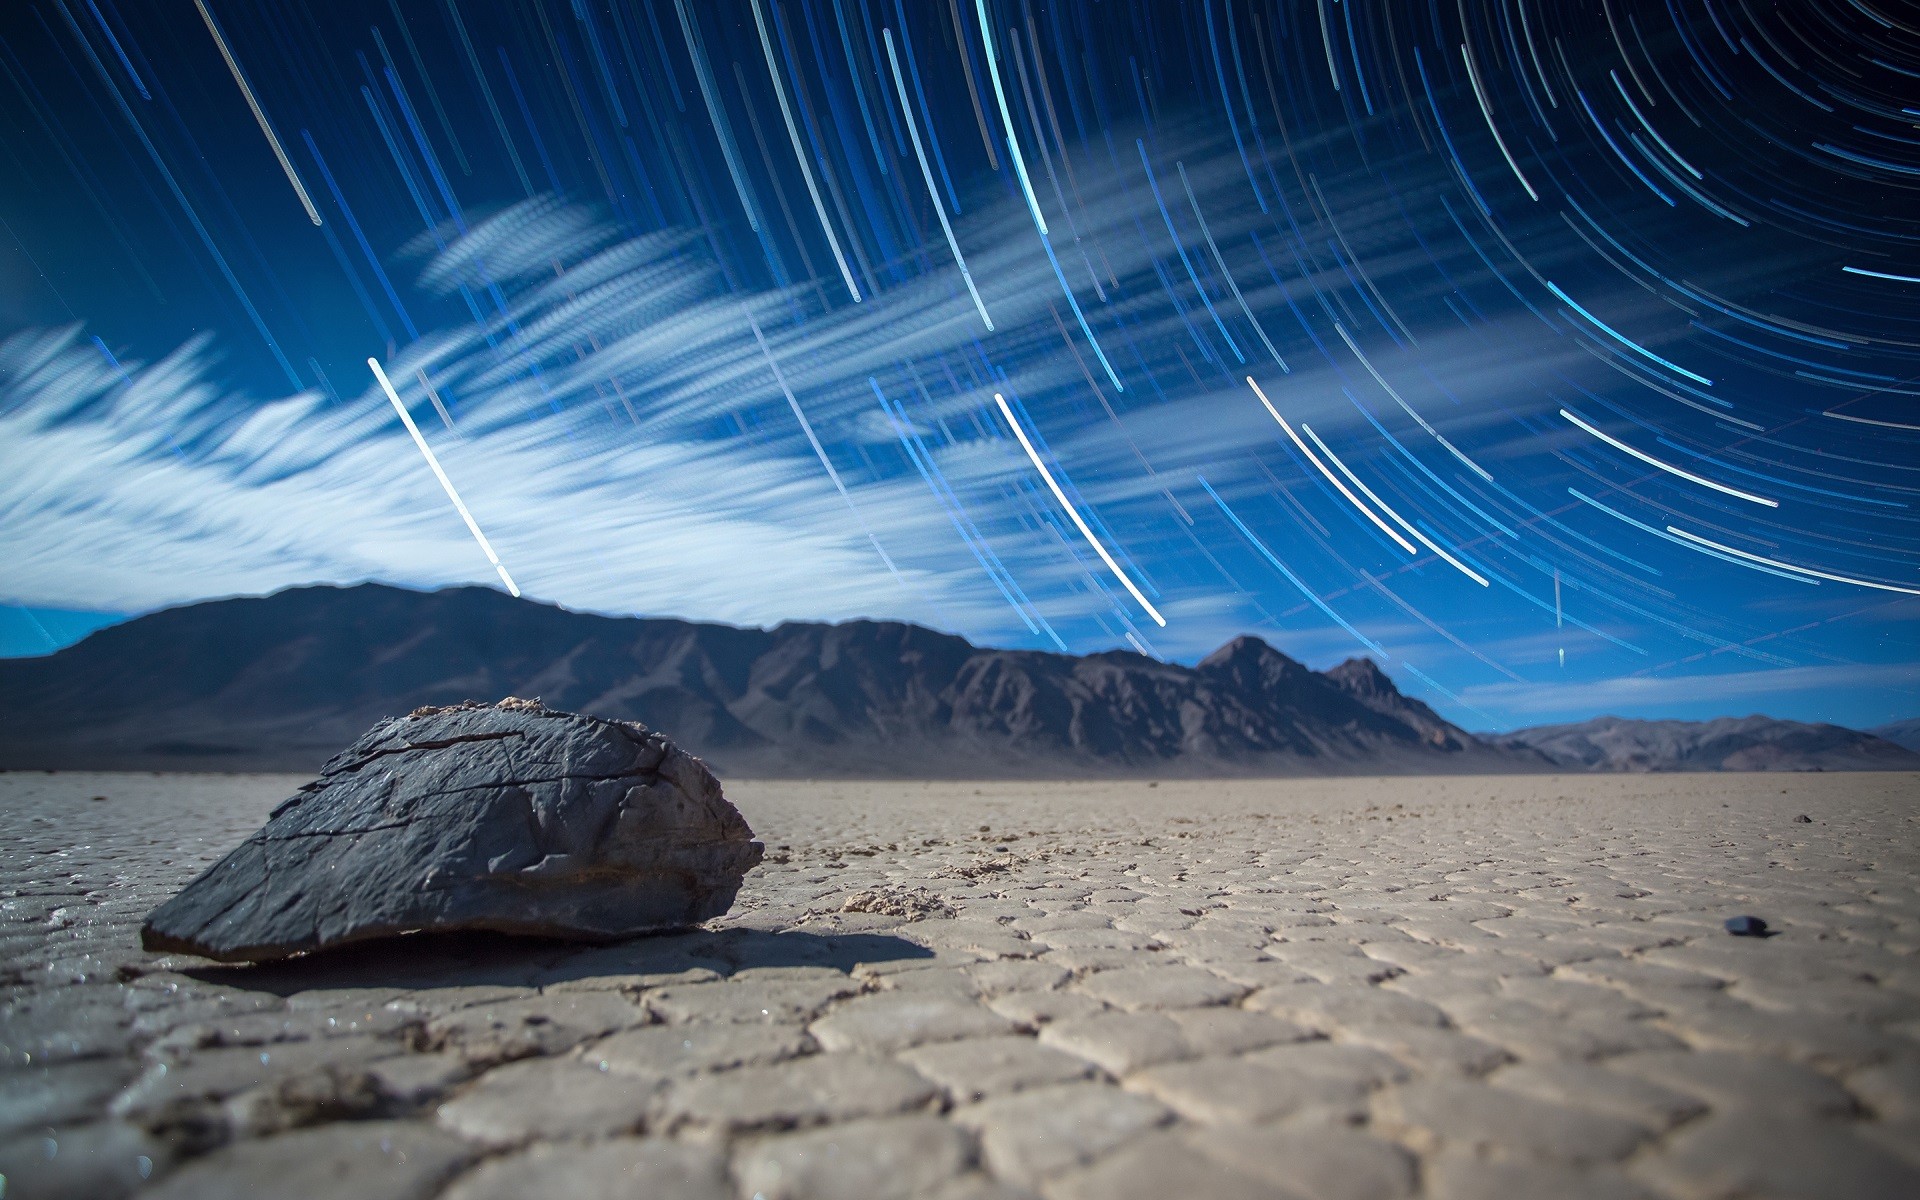 General 1920x1200 nature landscape abstract rocks desert hills long exposure star trails worm's eye view depth of field blue